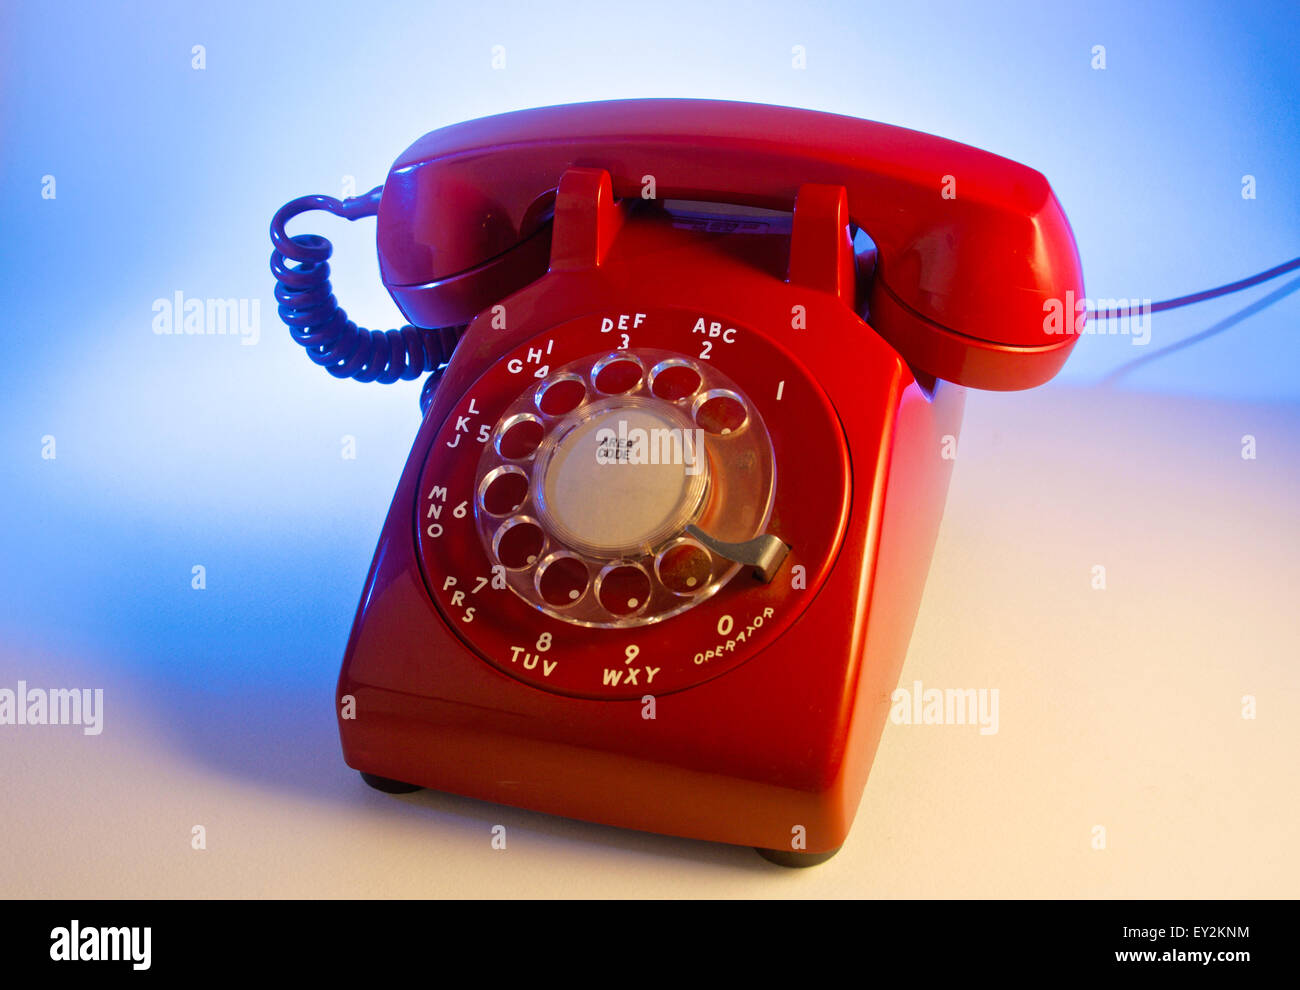 Vintage, red rotary telephone, with blue back light. Stock Photo